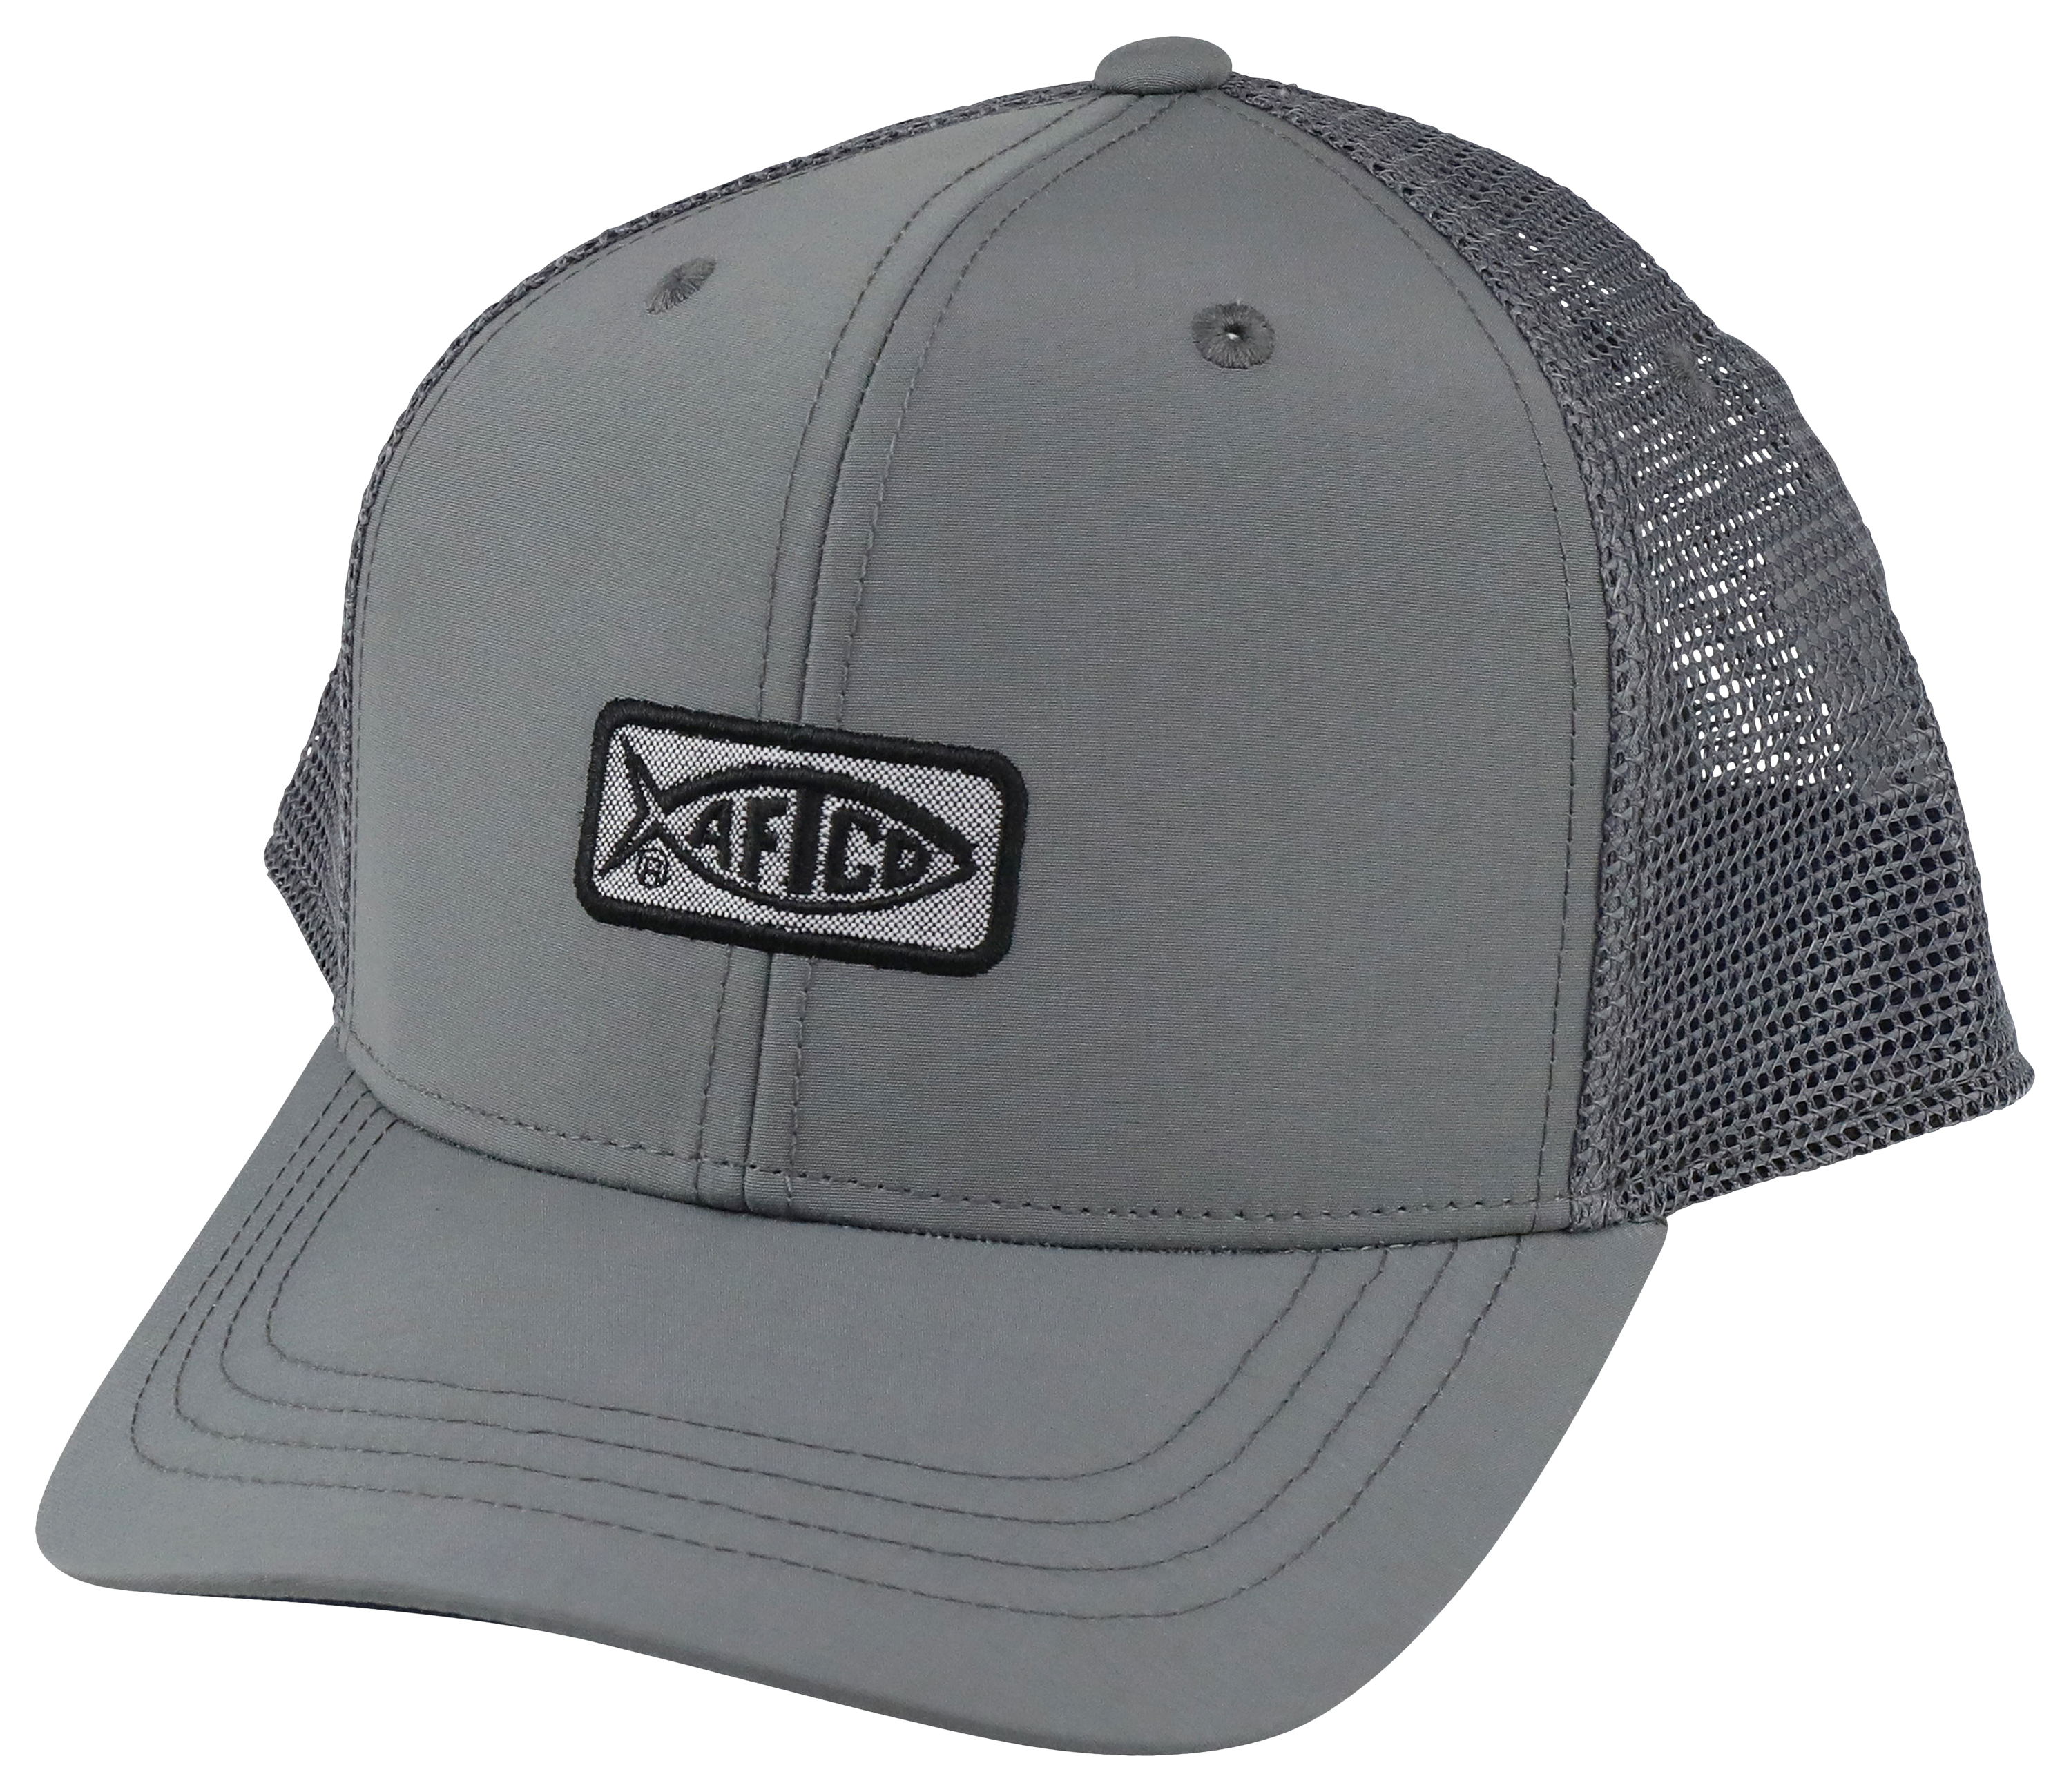 AFTCO Fishing Clothing - New Brand! - Pack and Paddle